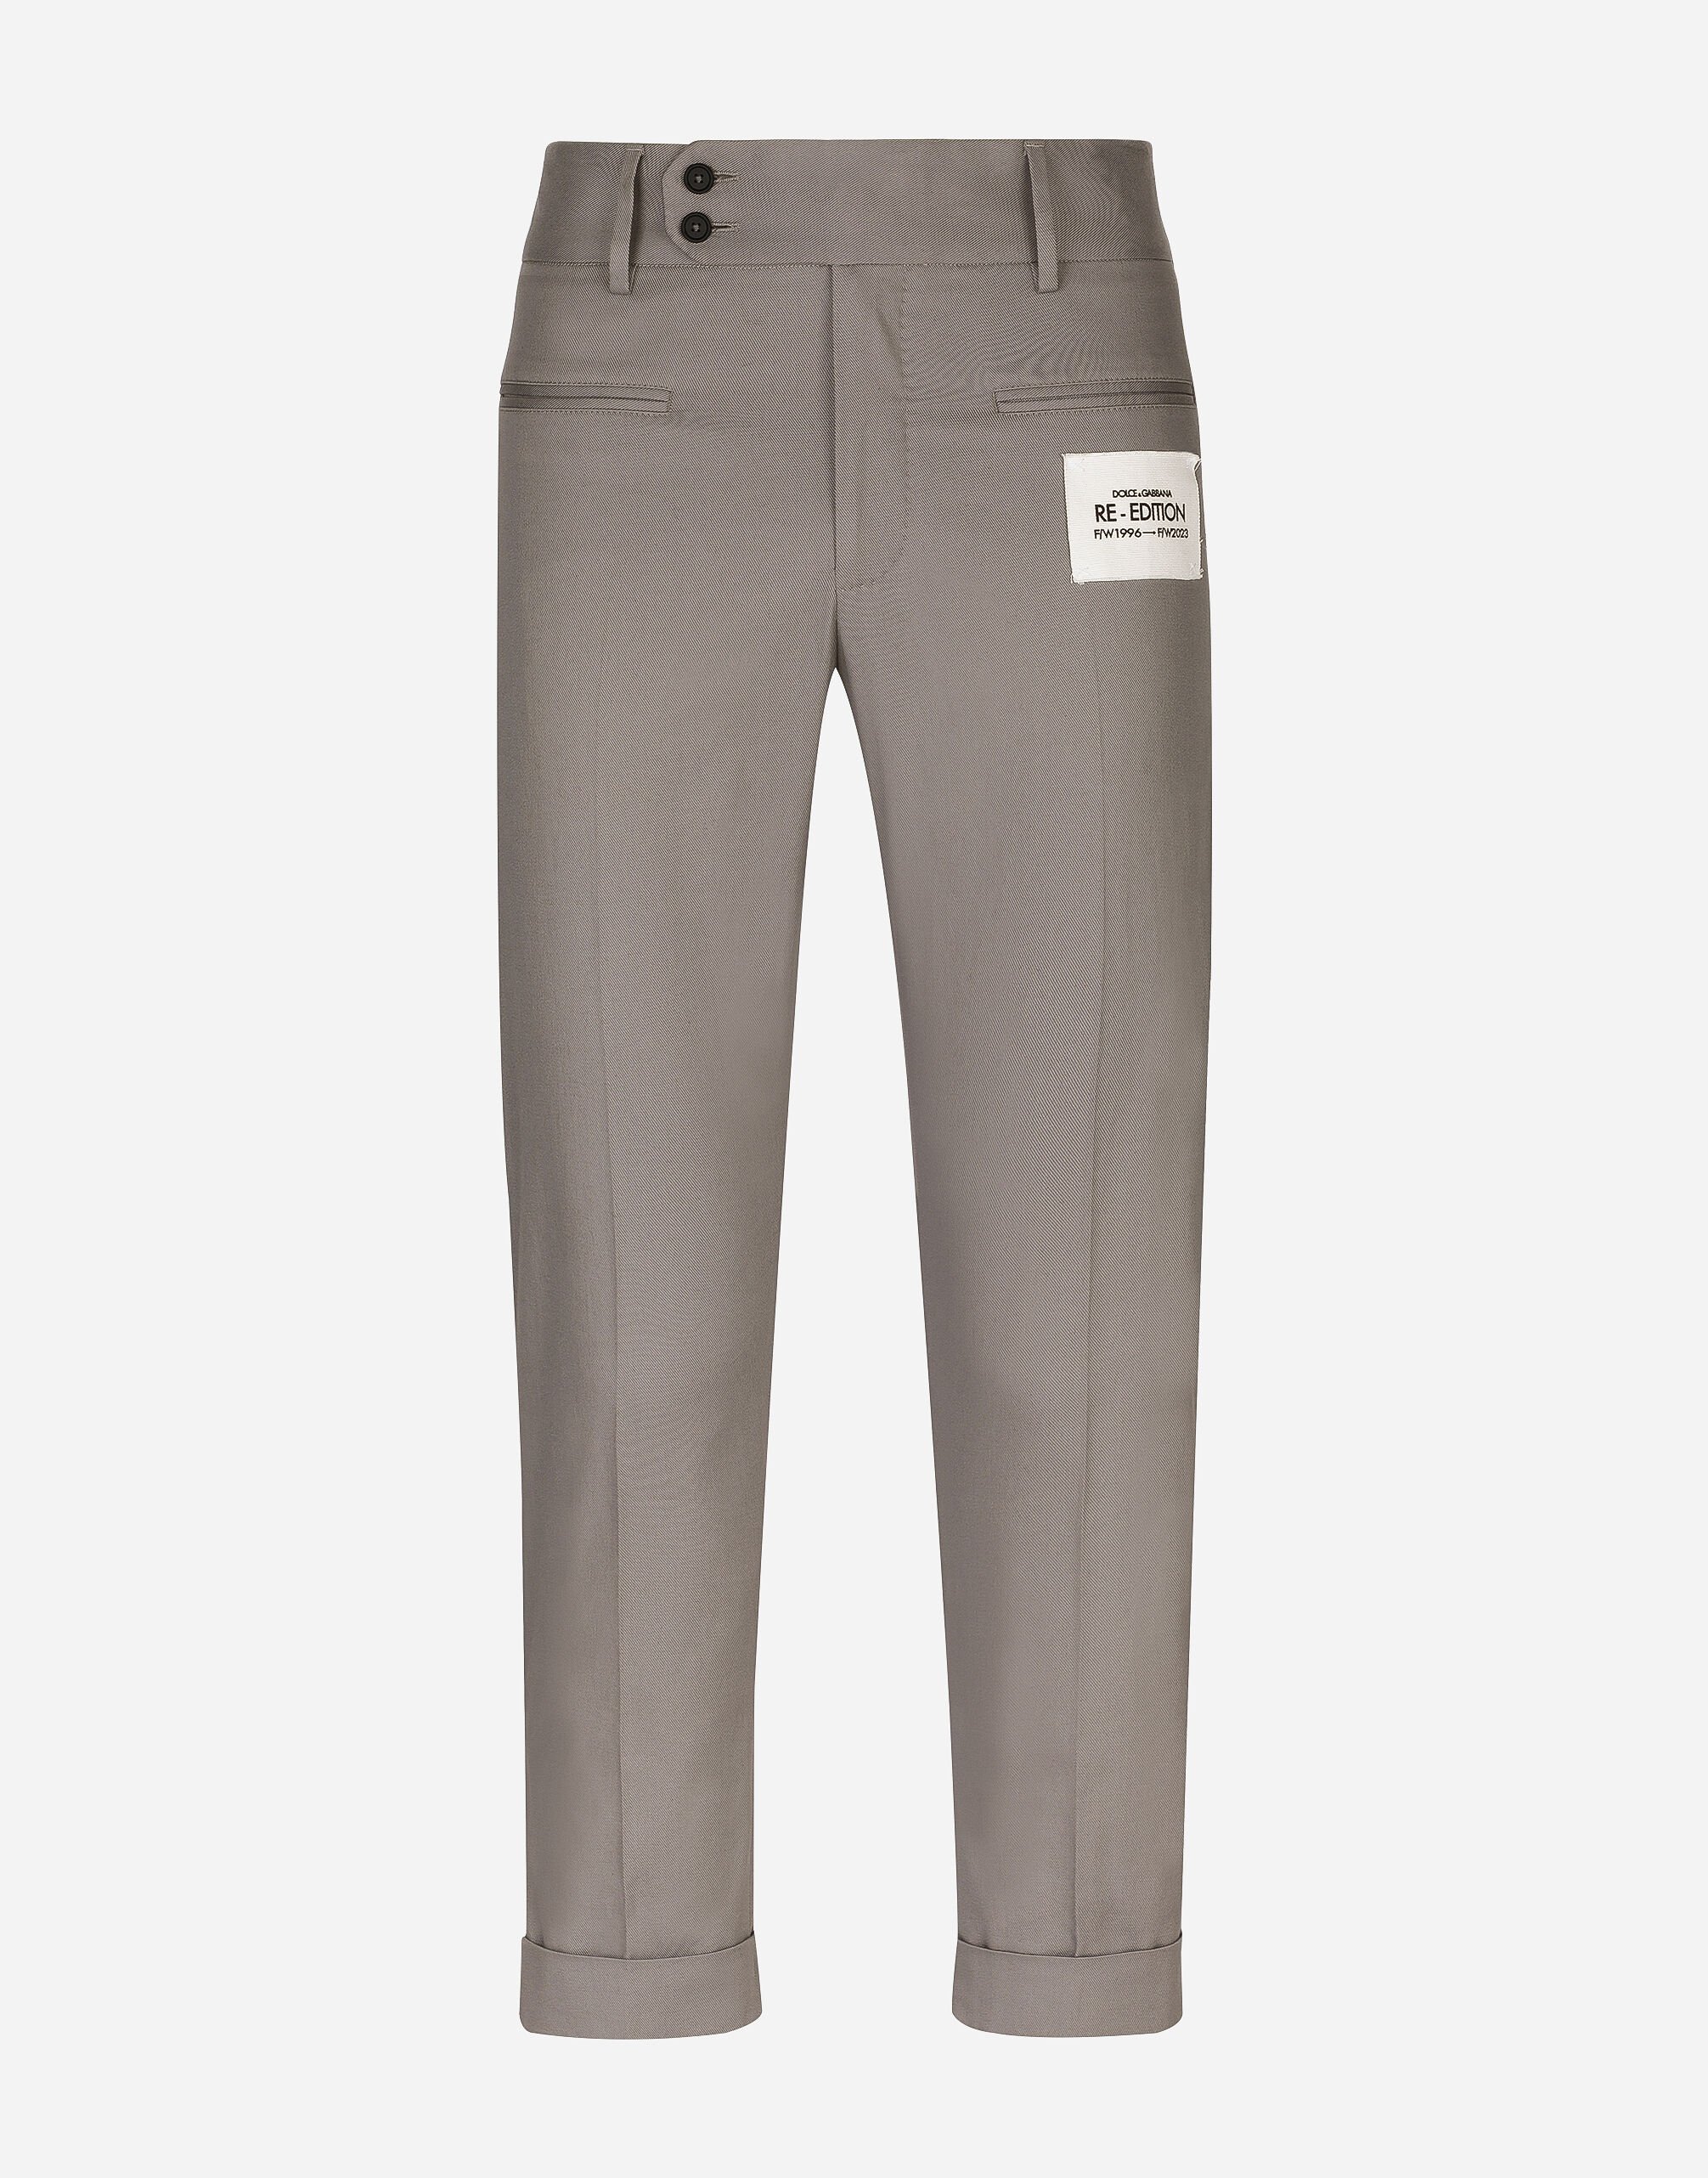 ${brand} Stretch drill pants with Re-Edition label ${colorDescription} ${masterID}